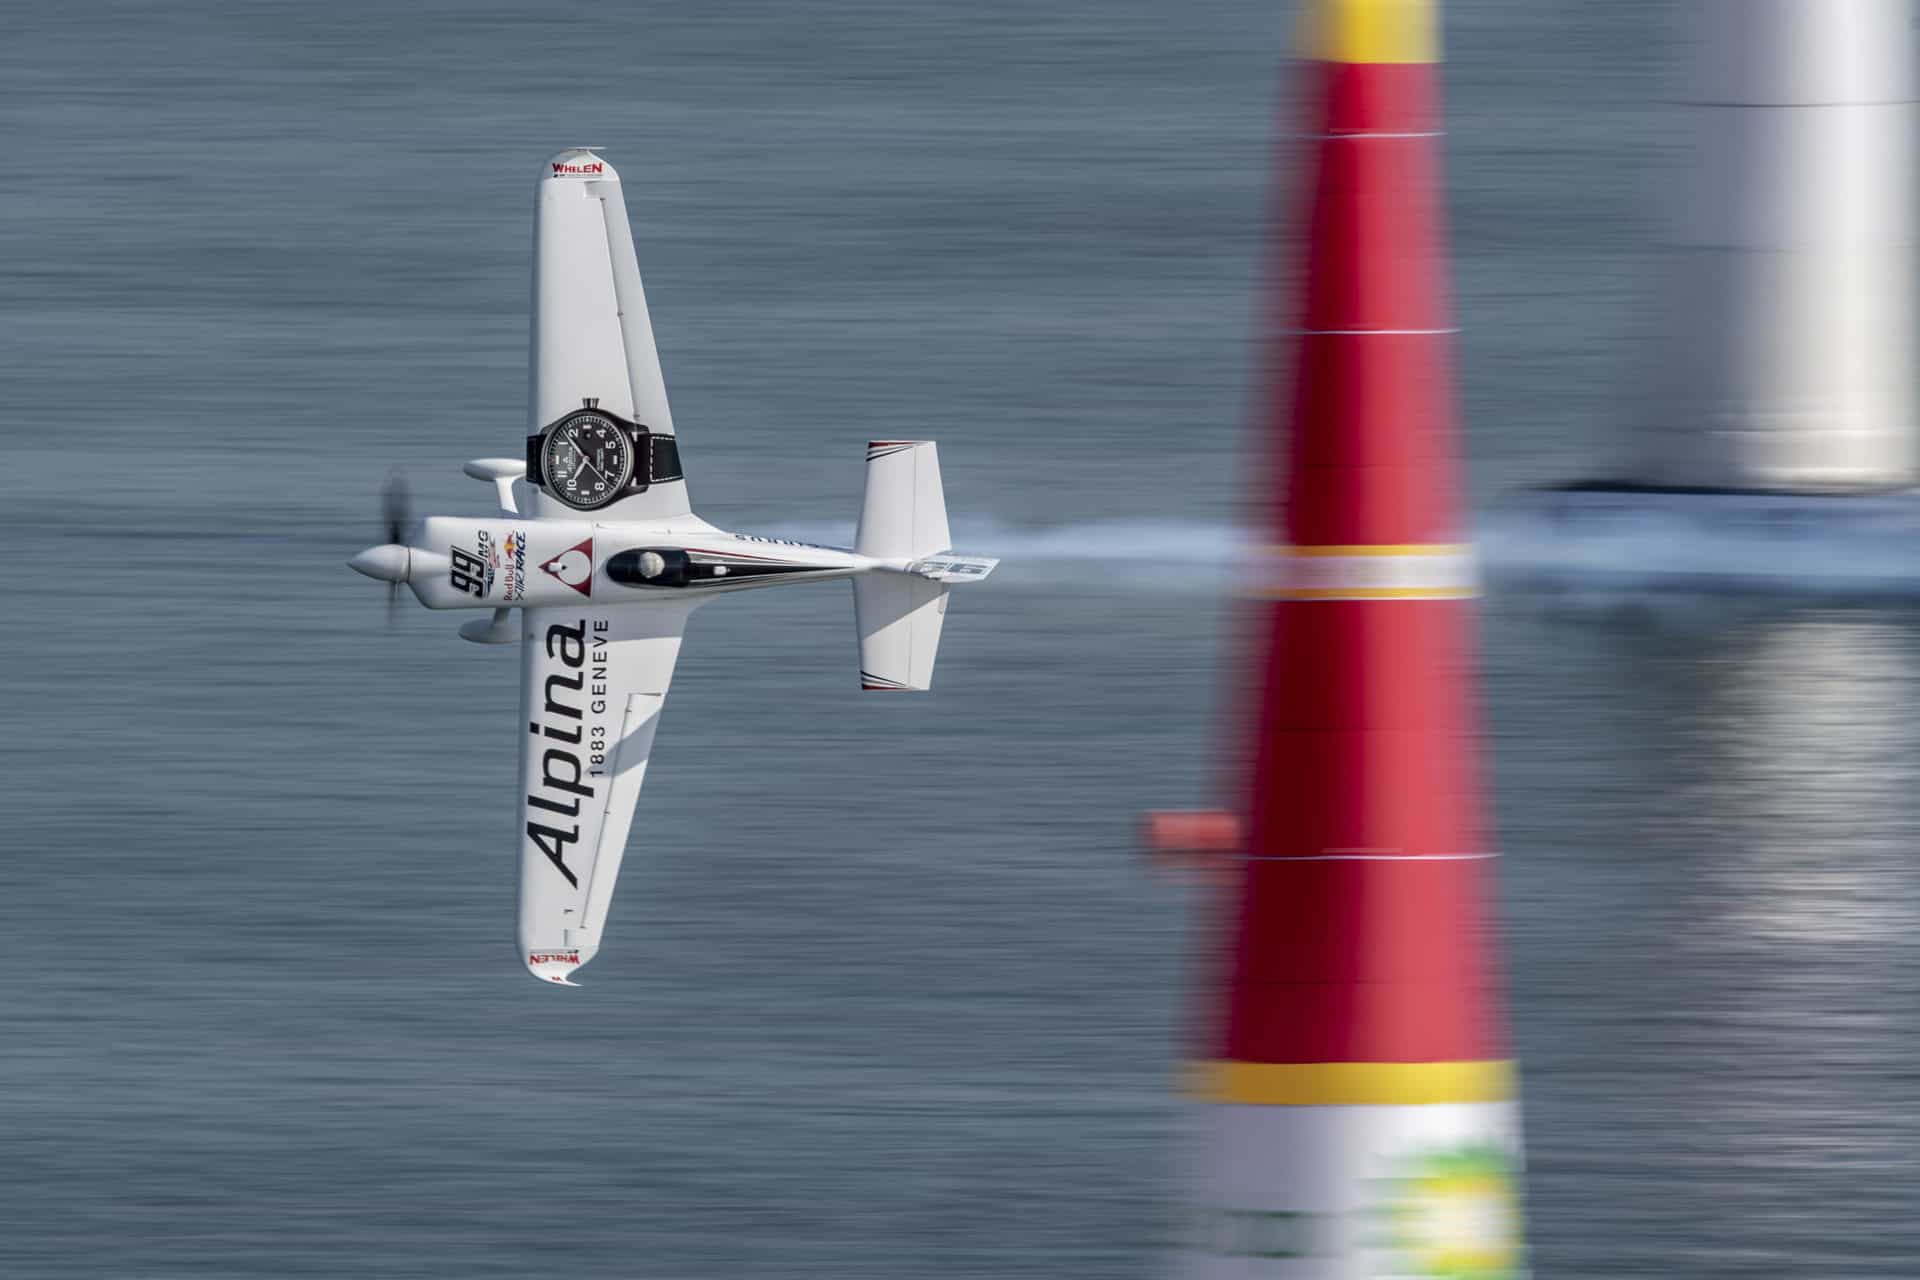 Mike Goulian and Team 99 win the 2nd place at the Red Bull Air Race World Championships in Kazan